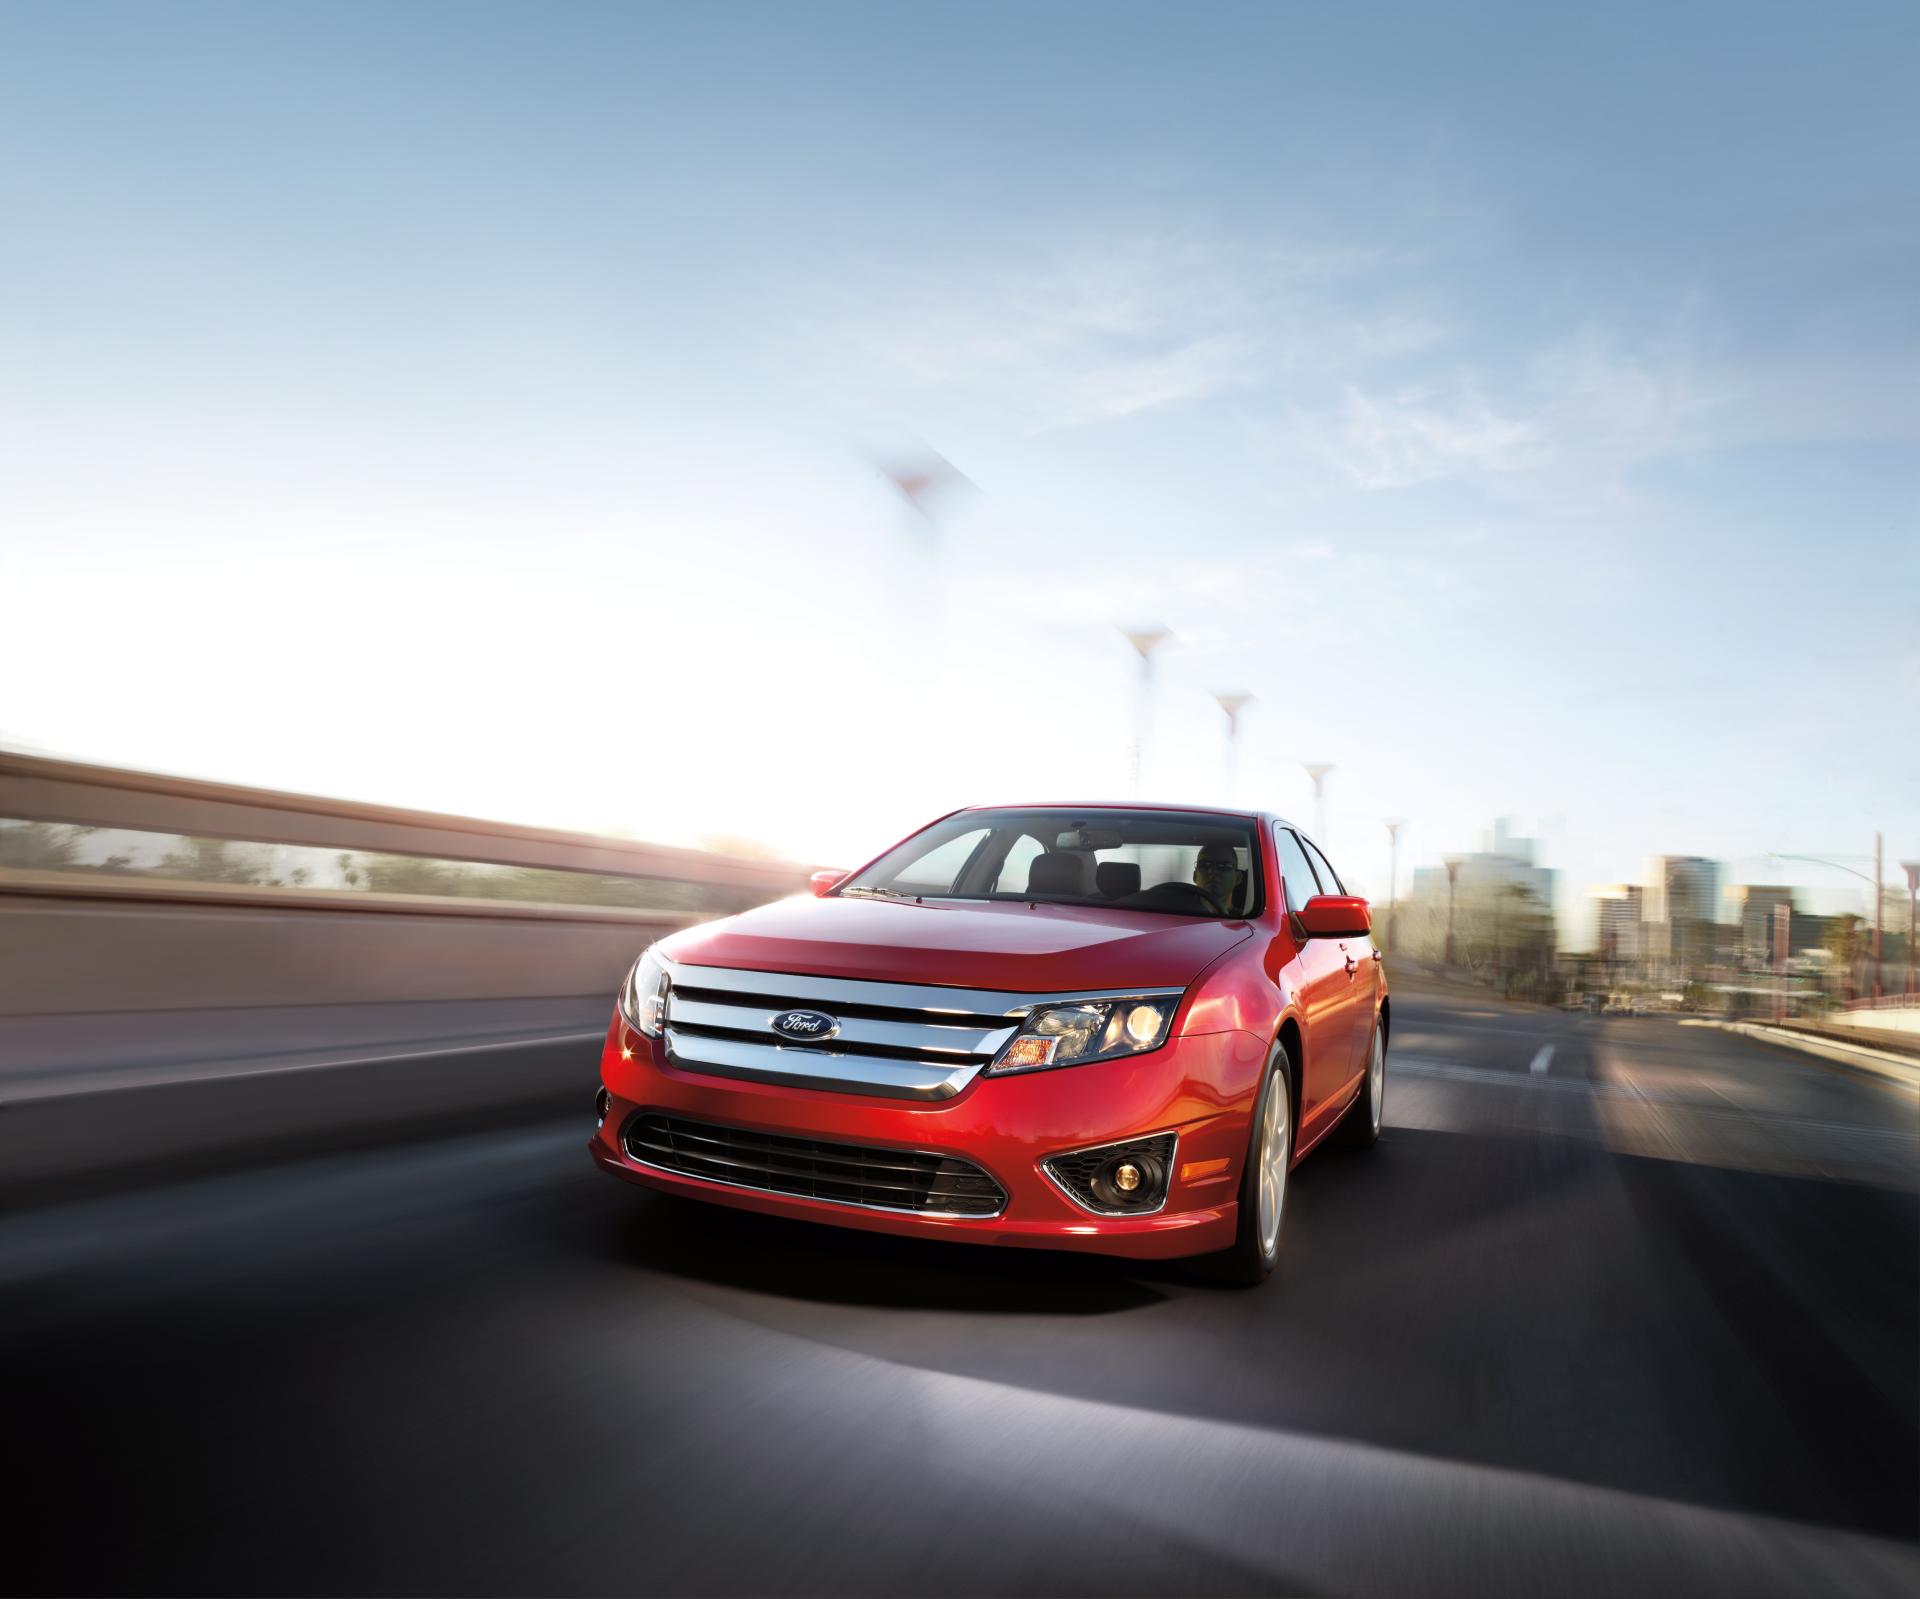 2012 Ford Fusion Hybrid Image Photo 4 Of 10